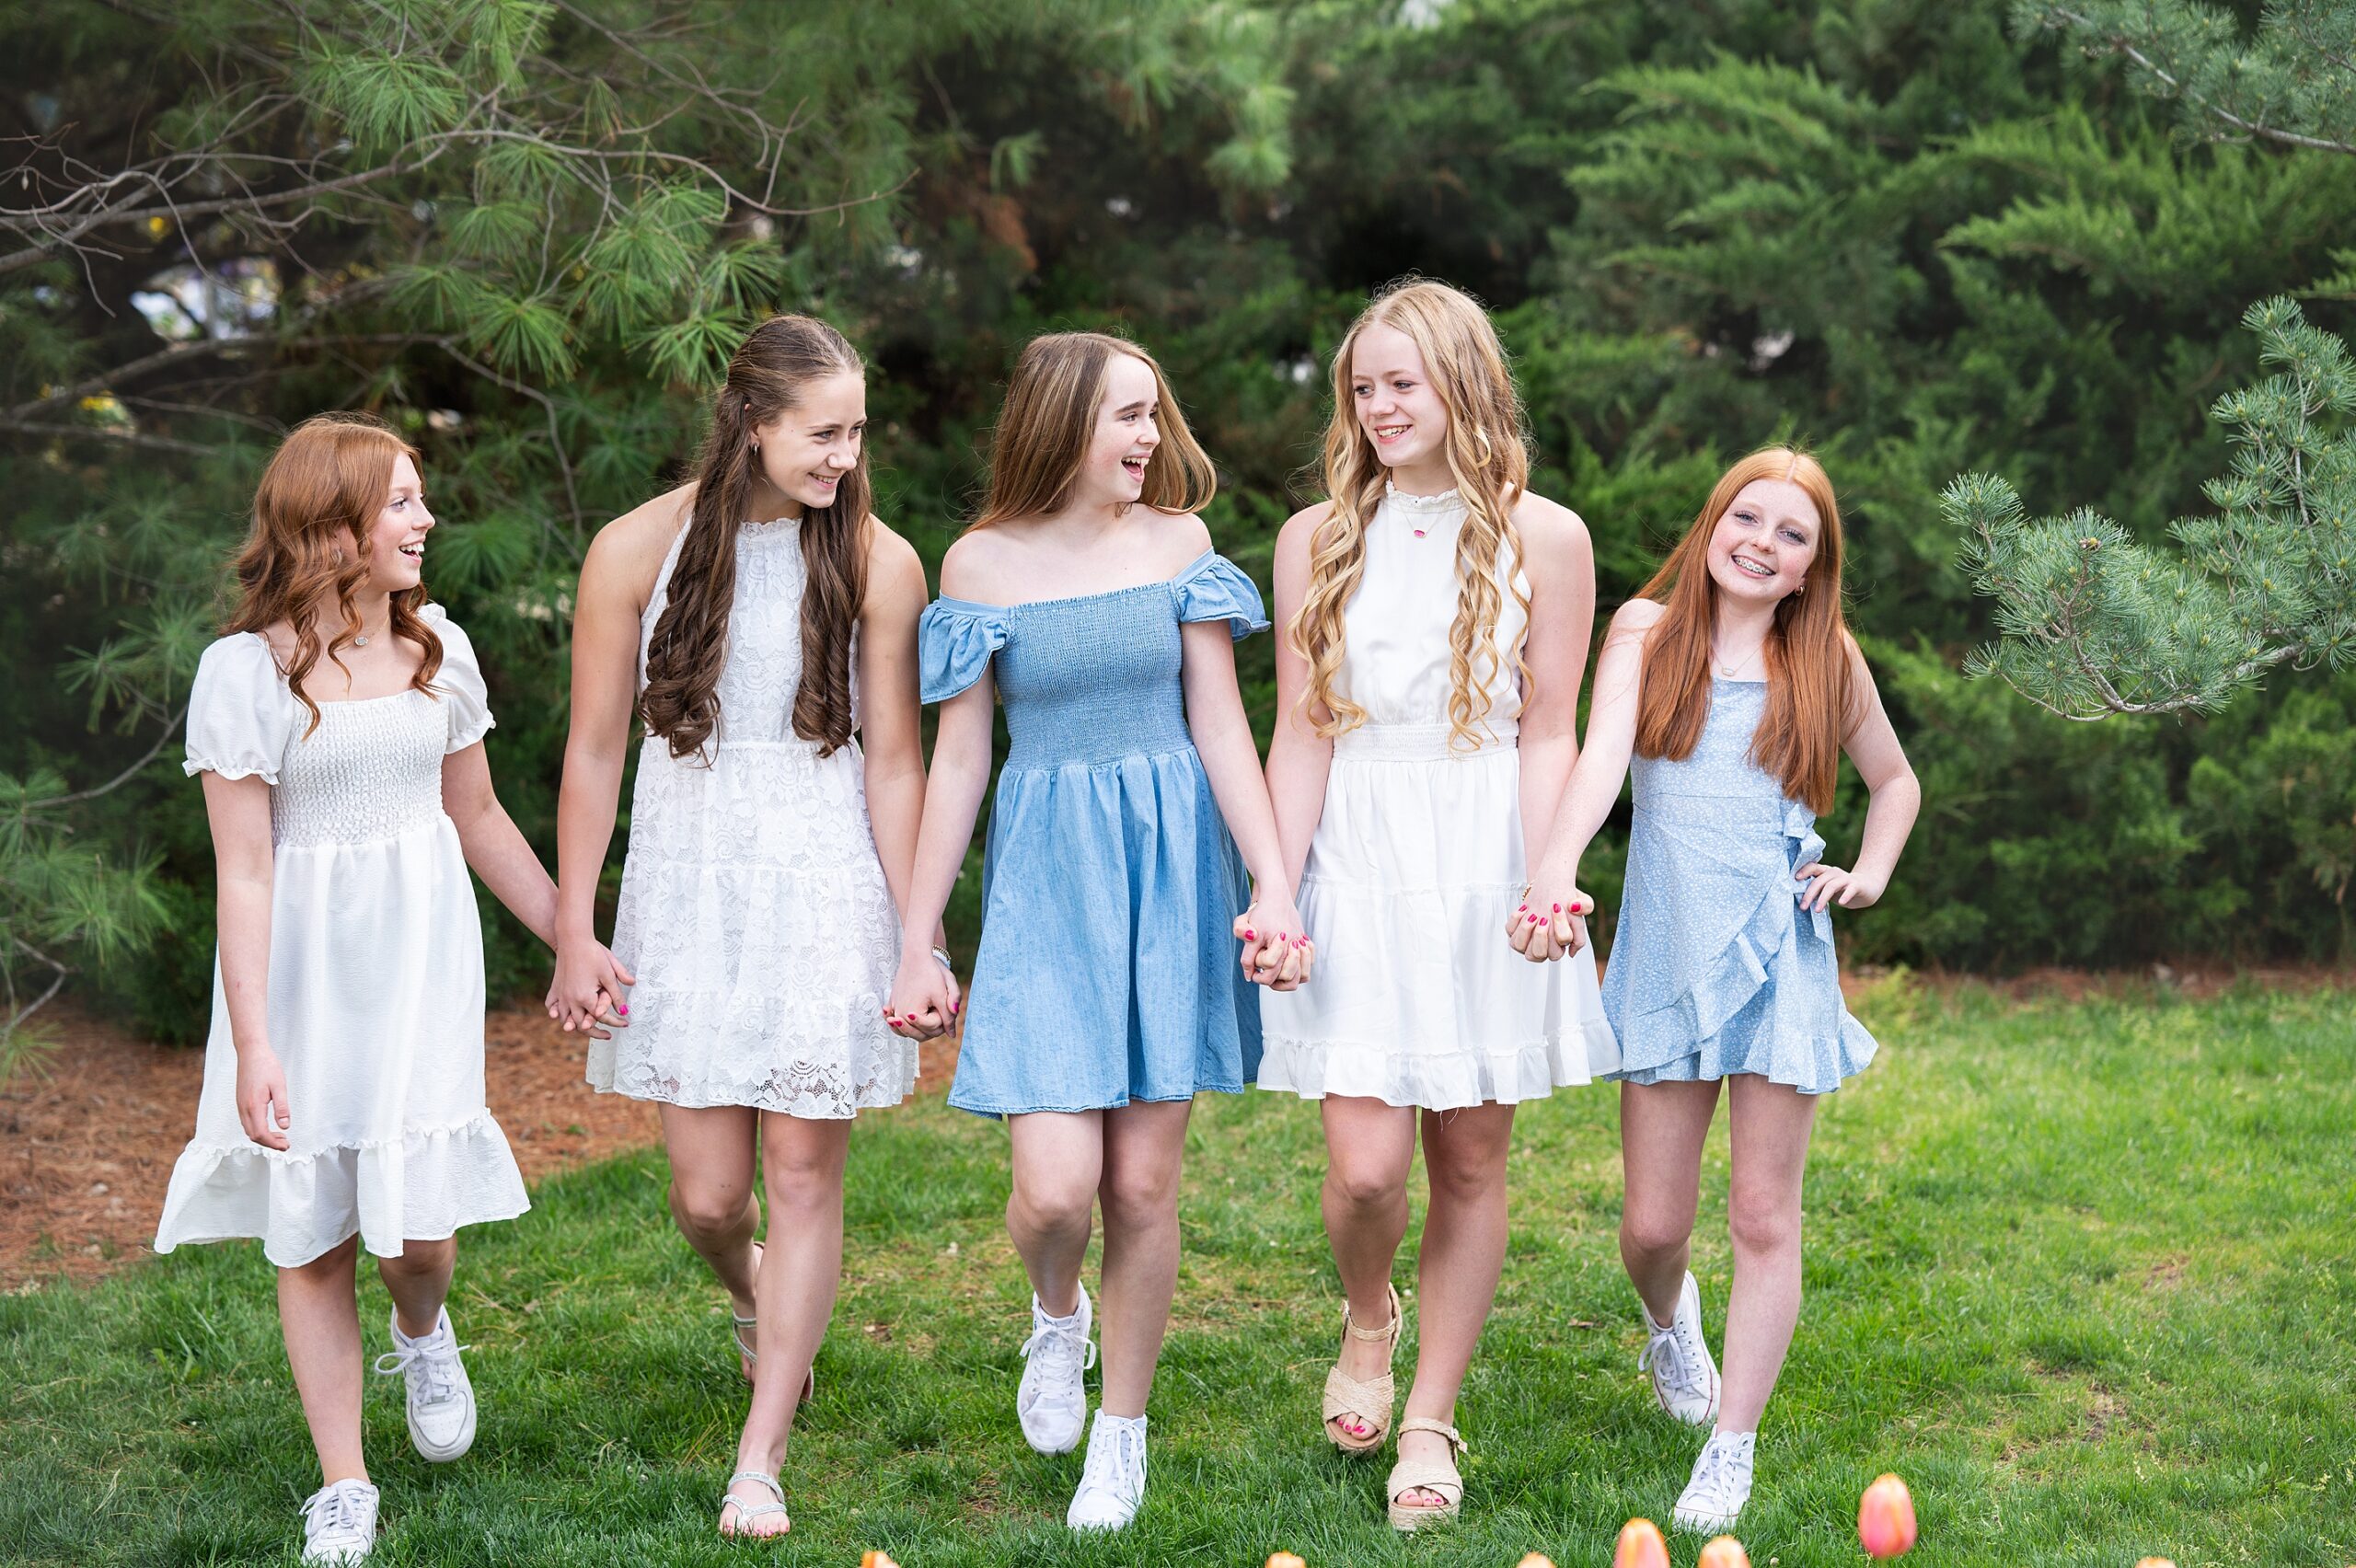 teen girls photoshoot in the spring wearing dresses in a natural setting